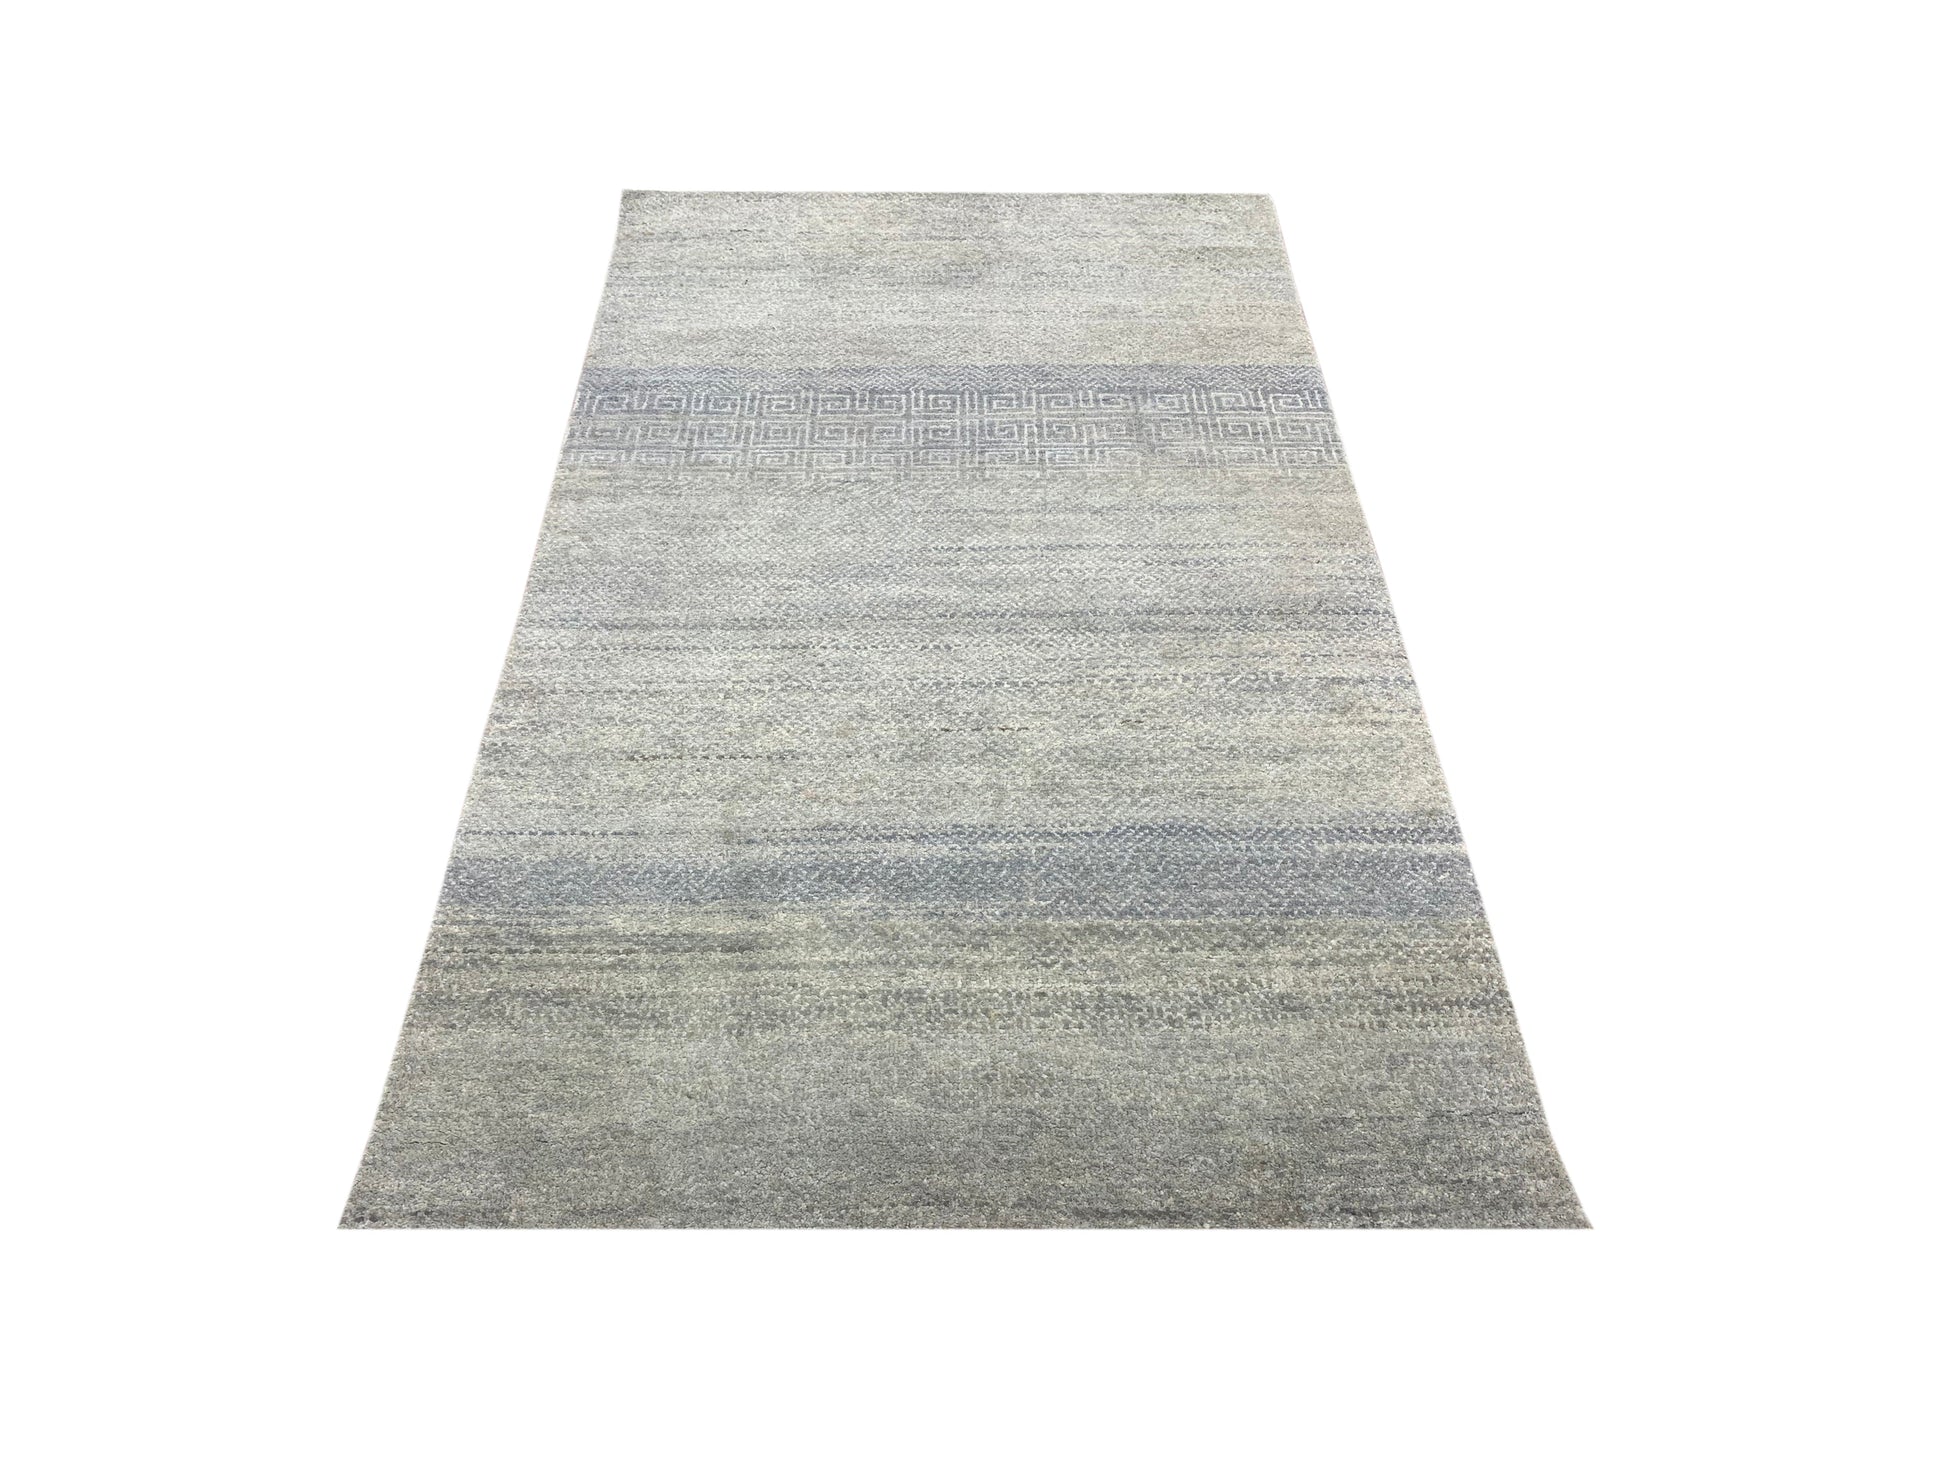 Get trendy with Grey Silk & Wool Oxidised Modern Handknotted Area Rug 2.11x5.3ft 88x160Cms - Modern Rugs available at Jaipur Oriental Rugs. Grab yours for $1380.00 today!